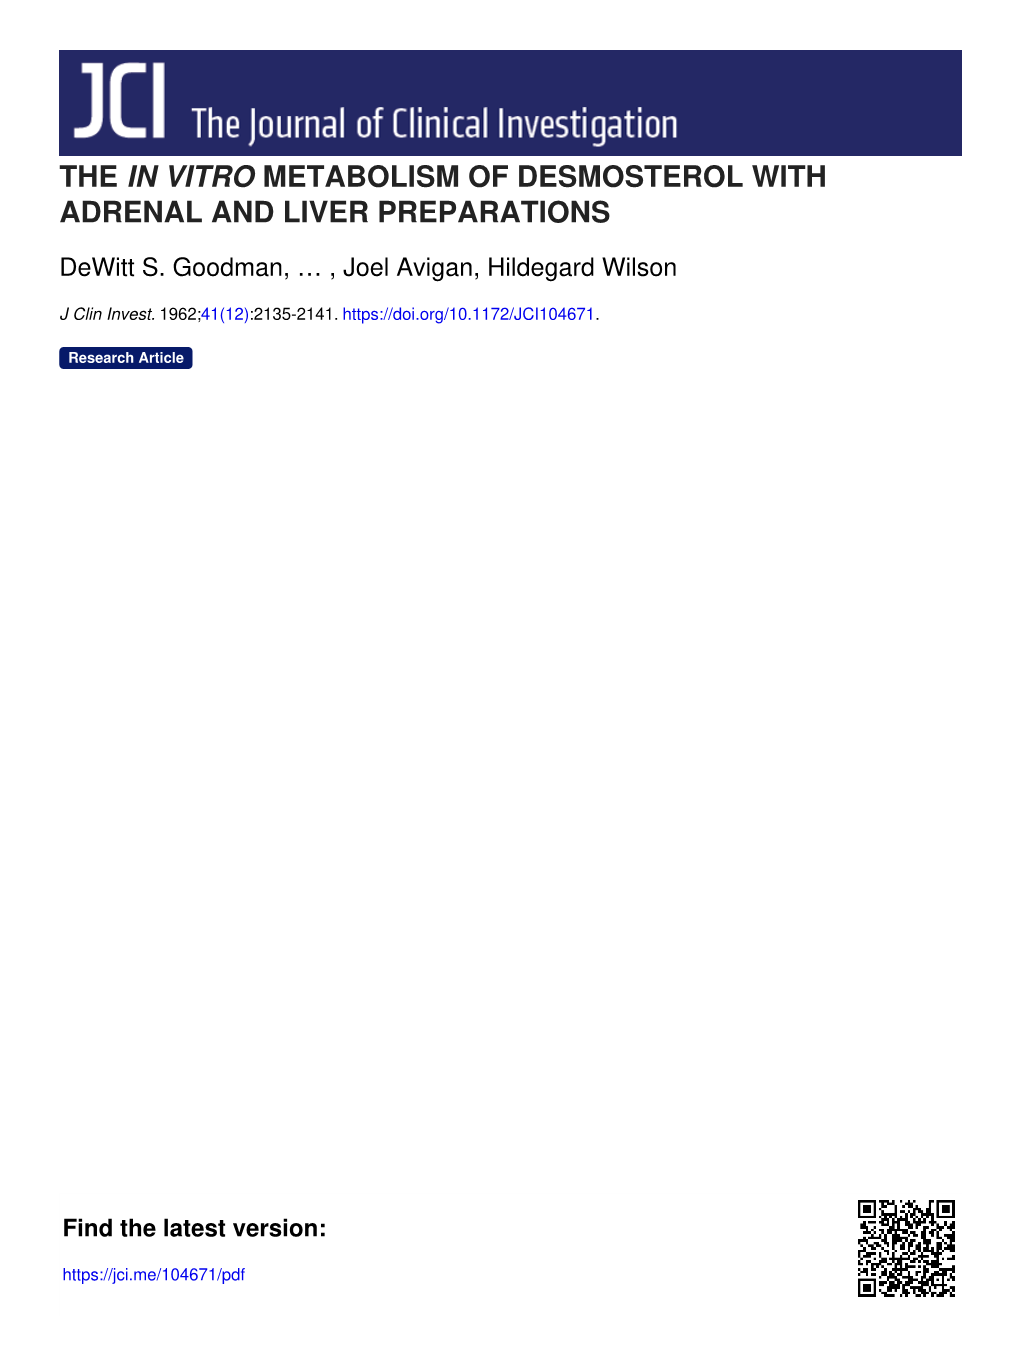 The in Vitro Metabolism of Desmosterol with Adrenal and Liver Preparations